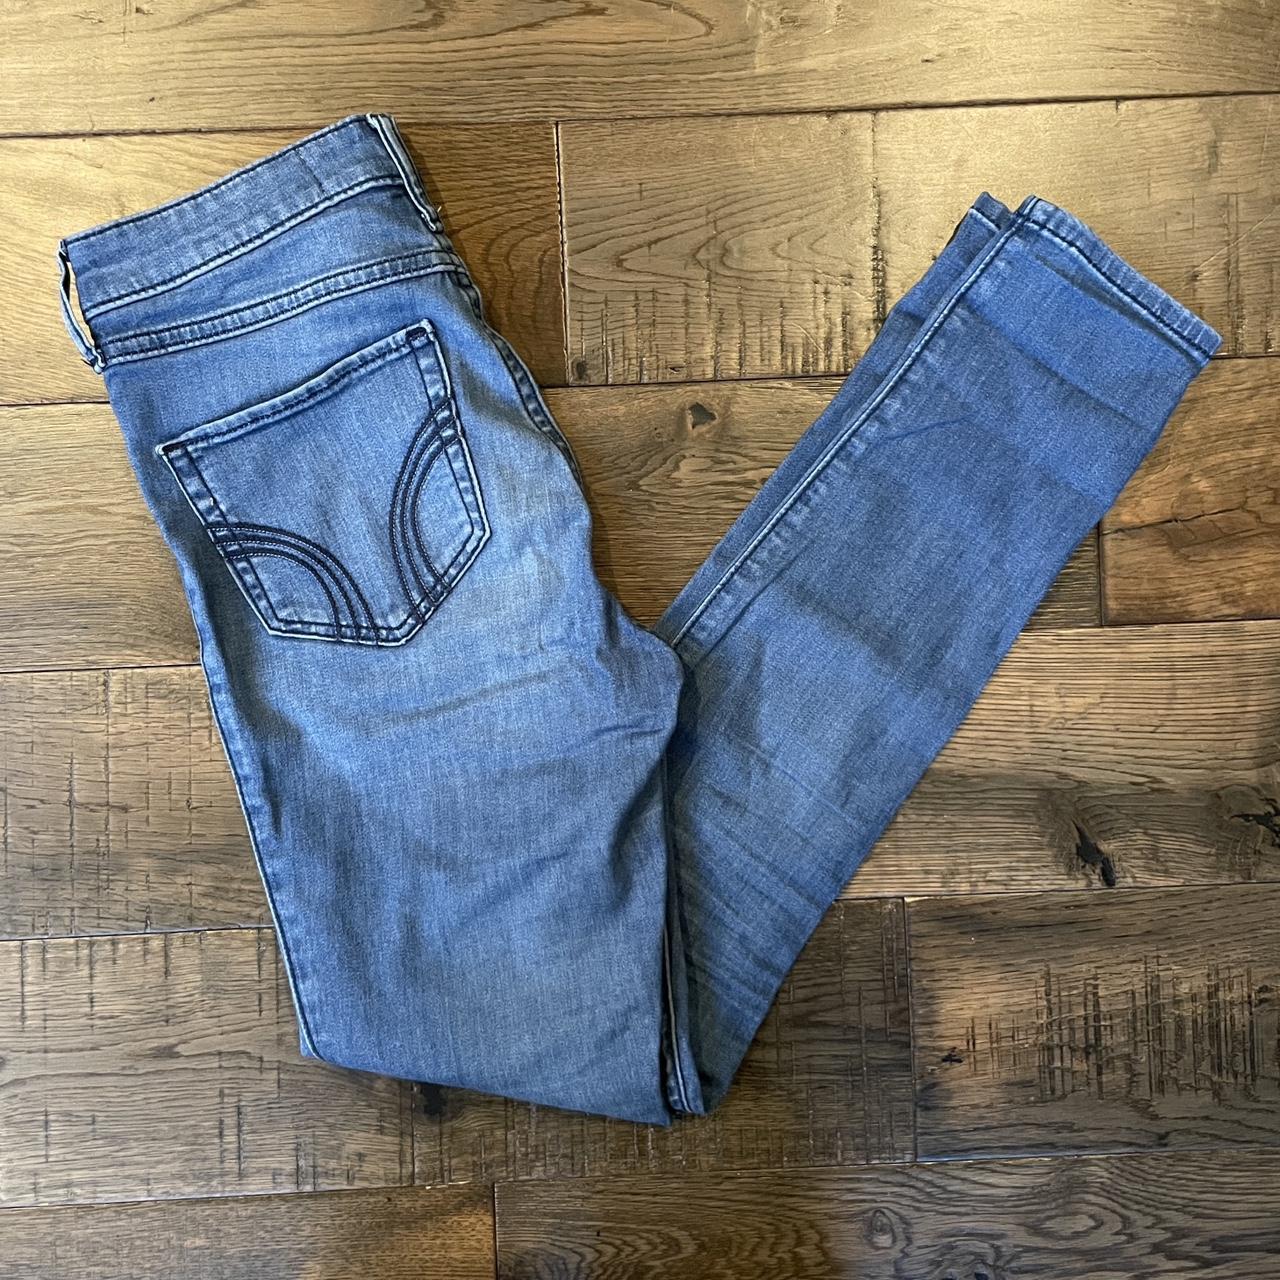 Hollister Jeans-jeggings Size 27 - $8 - From Kelsey